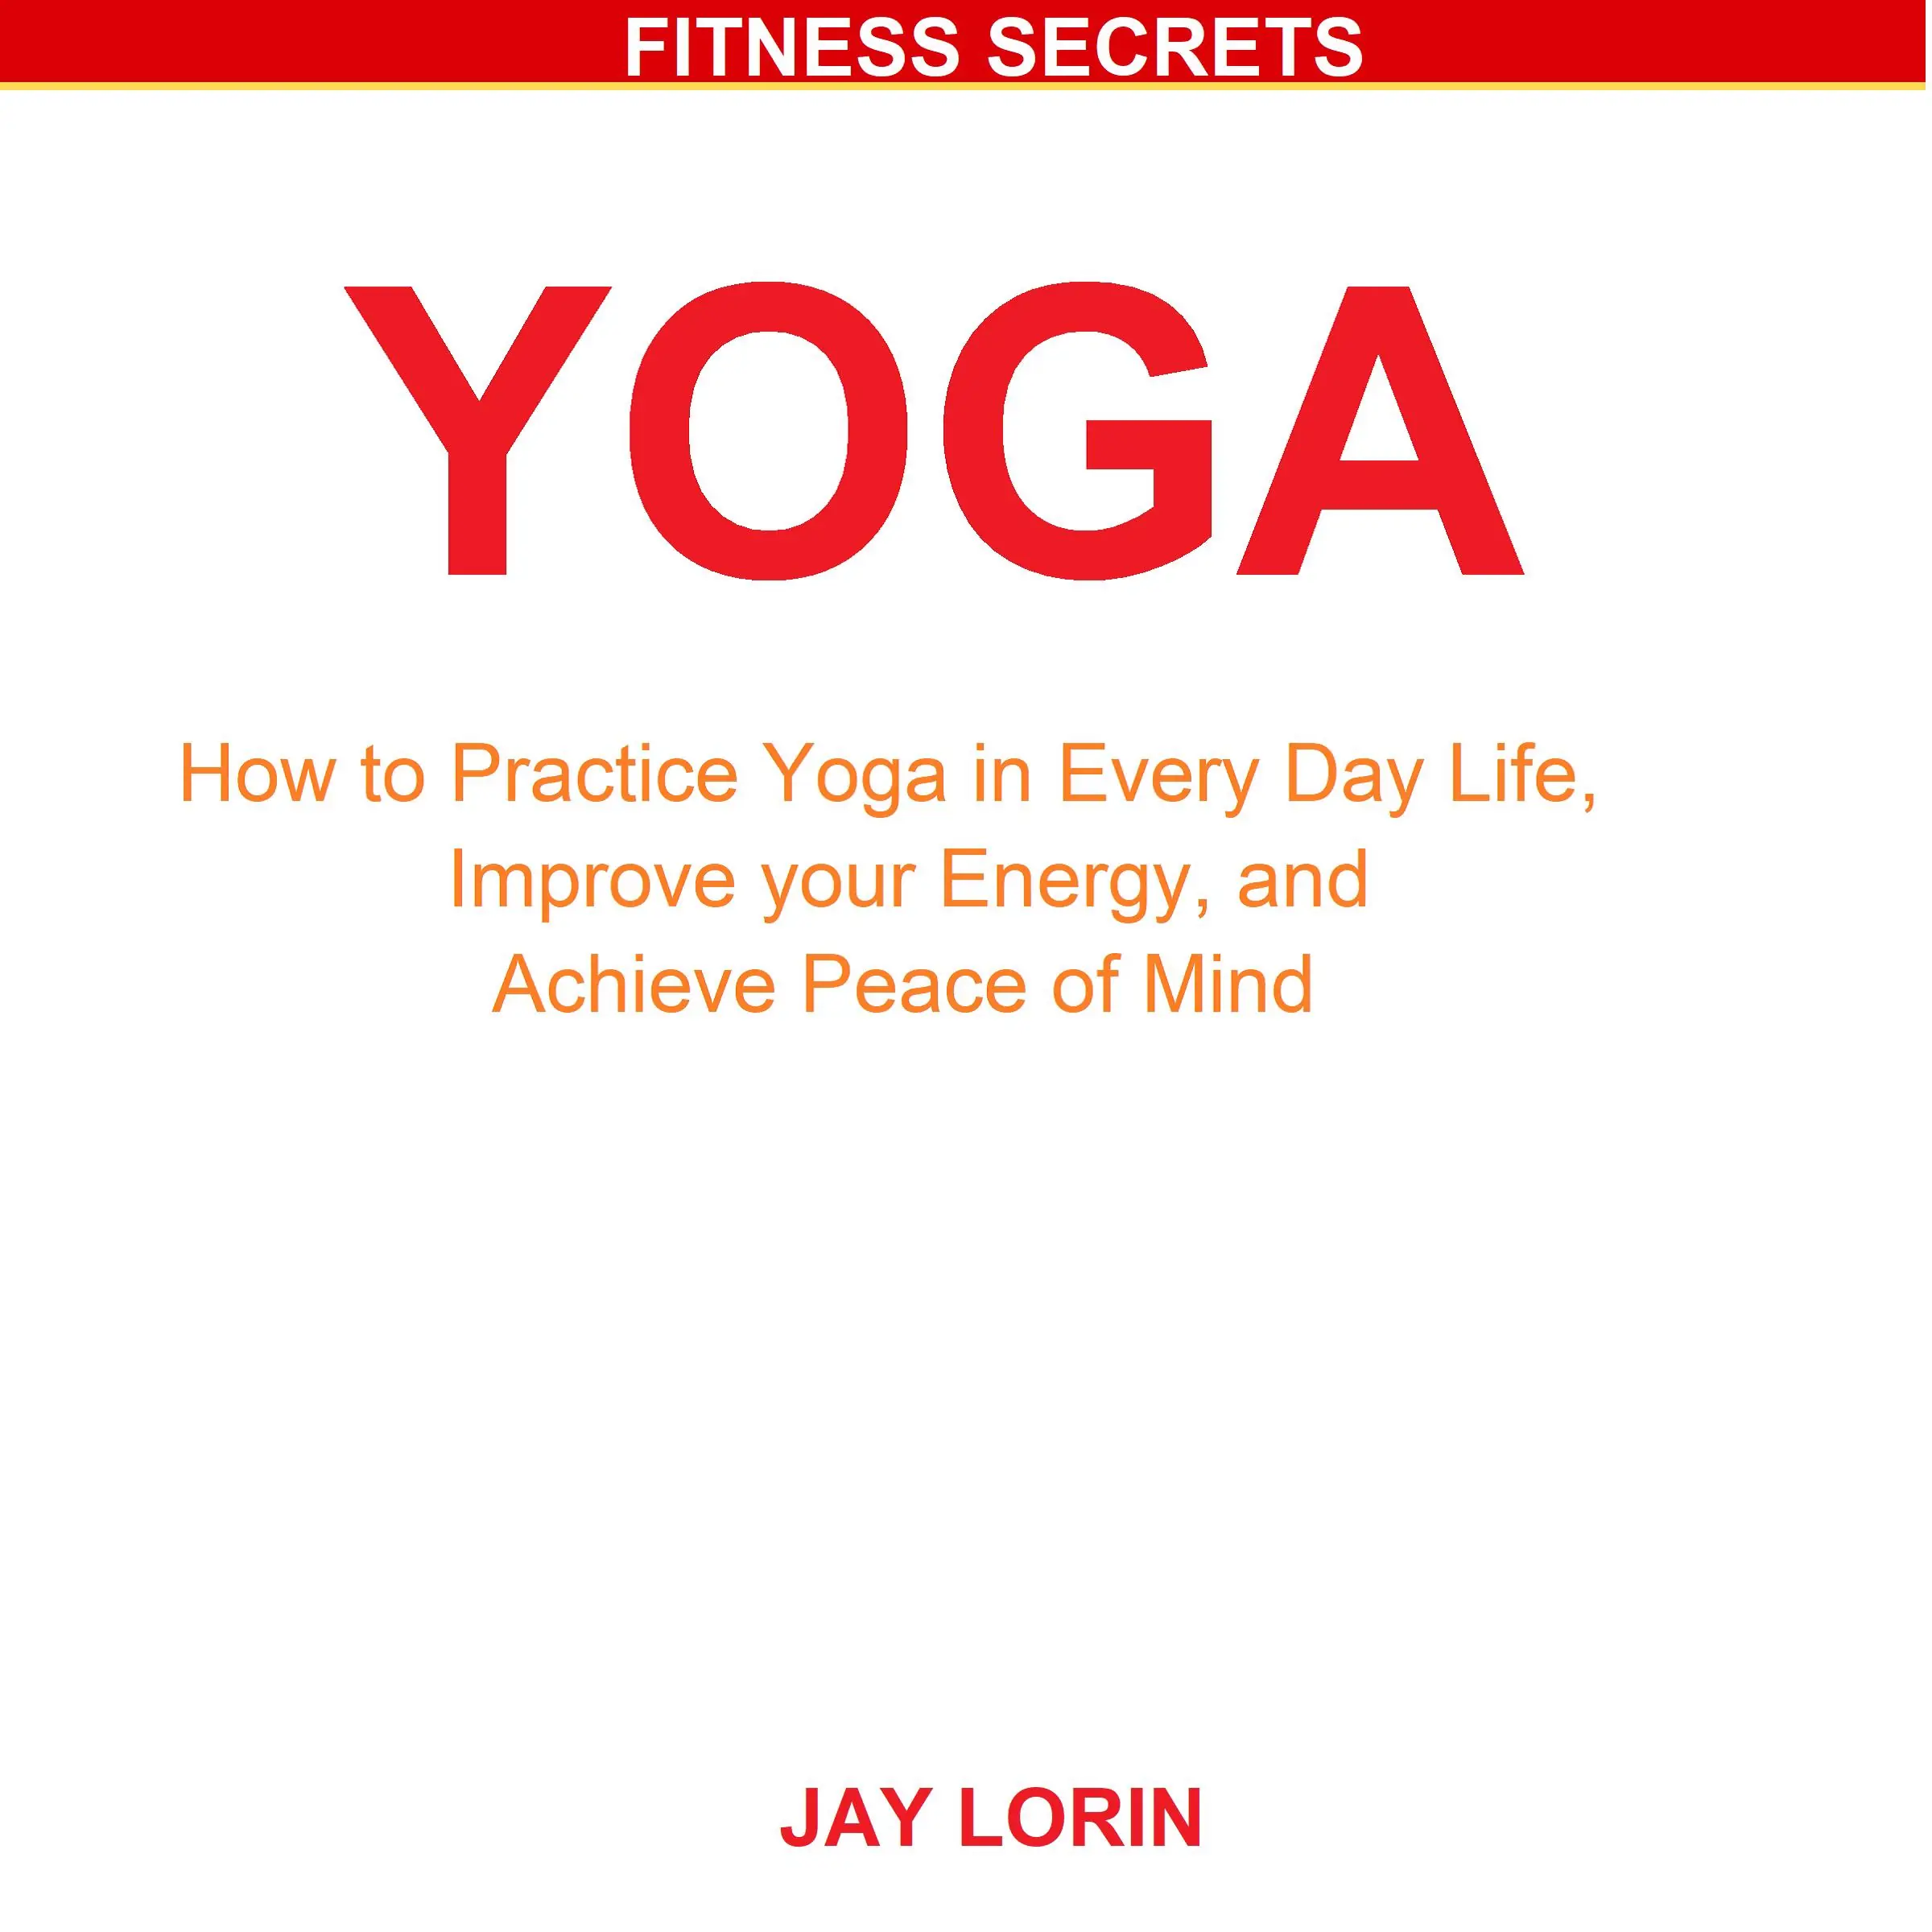 Yoga: How to Practice Yoga in Every Day Life, Improve your Energy, and Achieve Peace of Mind Audiobook by Jay Lorin